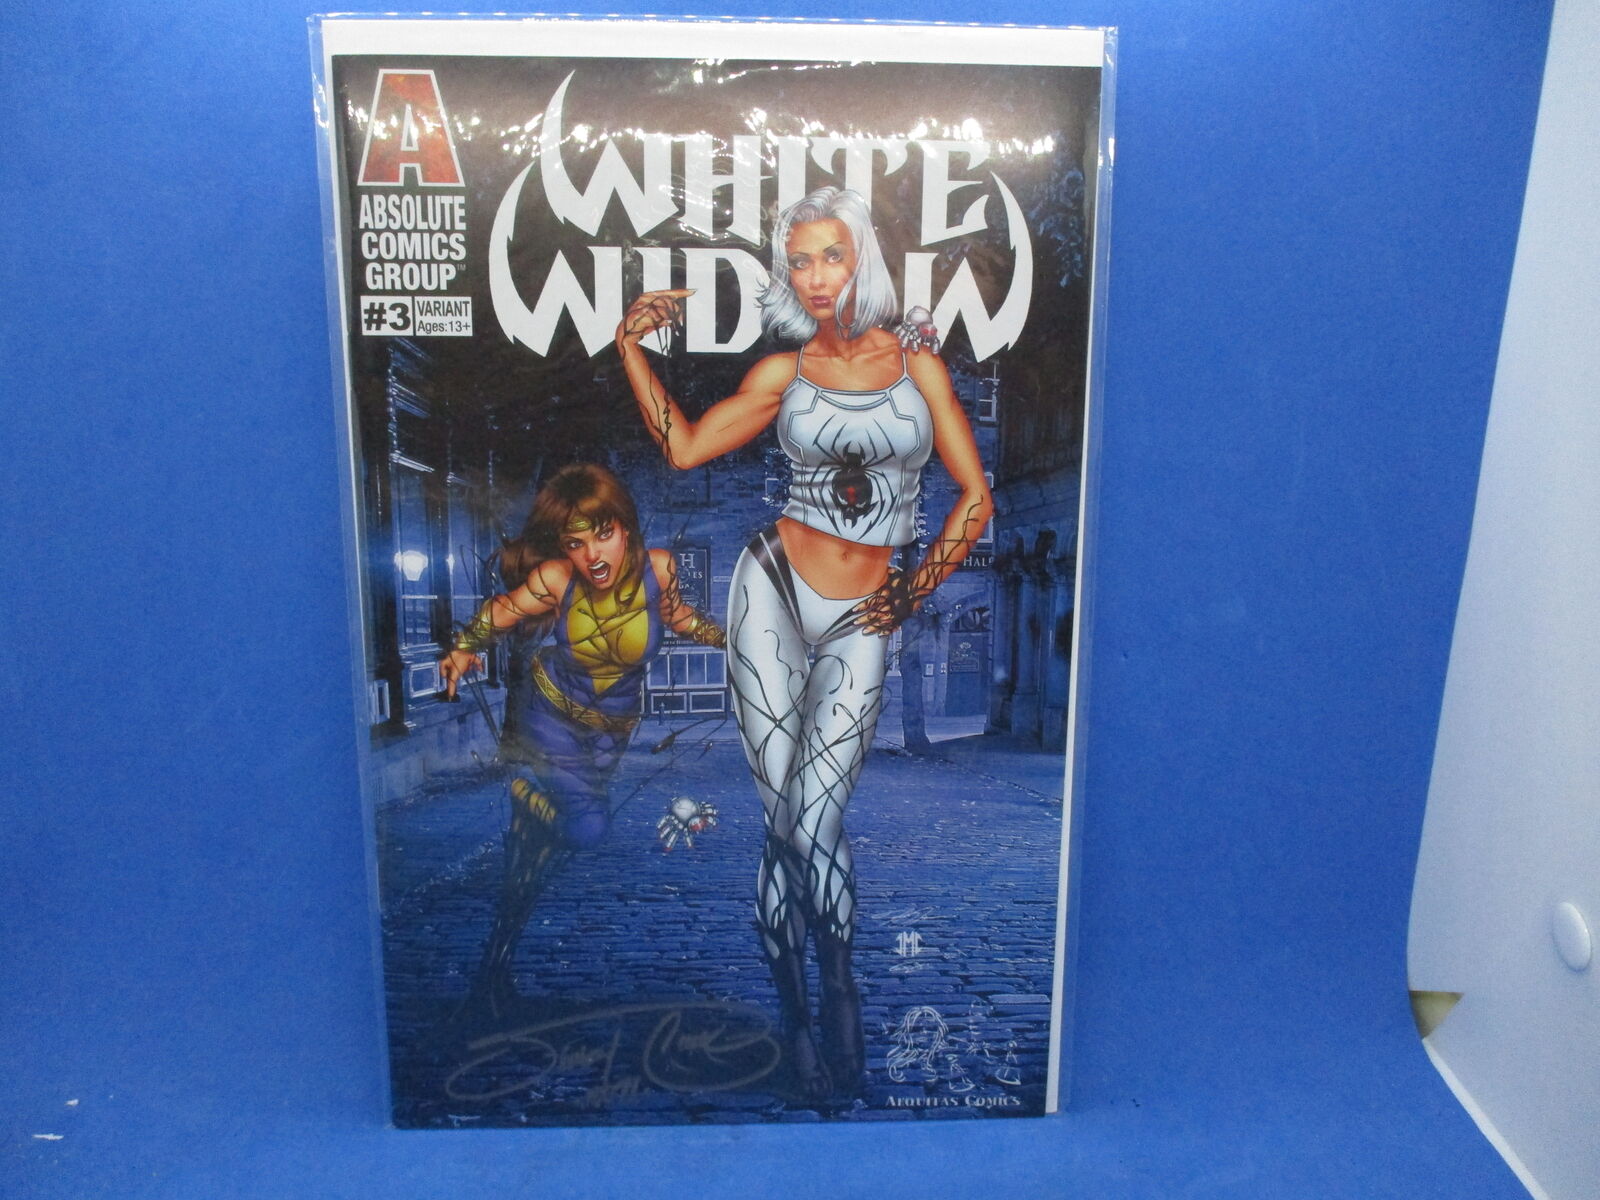 White Widow #3 Sexy Jeremy Clark SIGNED Stunning Blue Cover Hard to find HTF